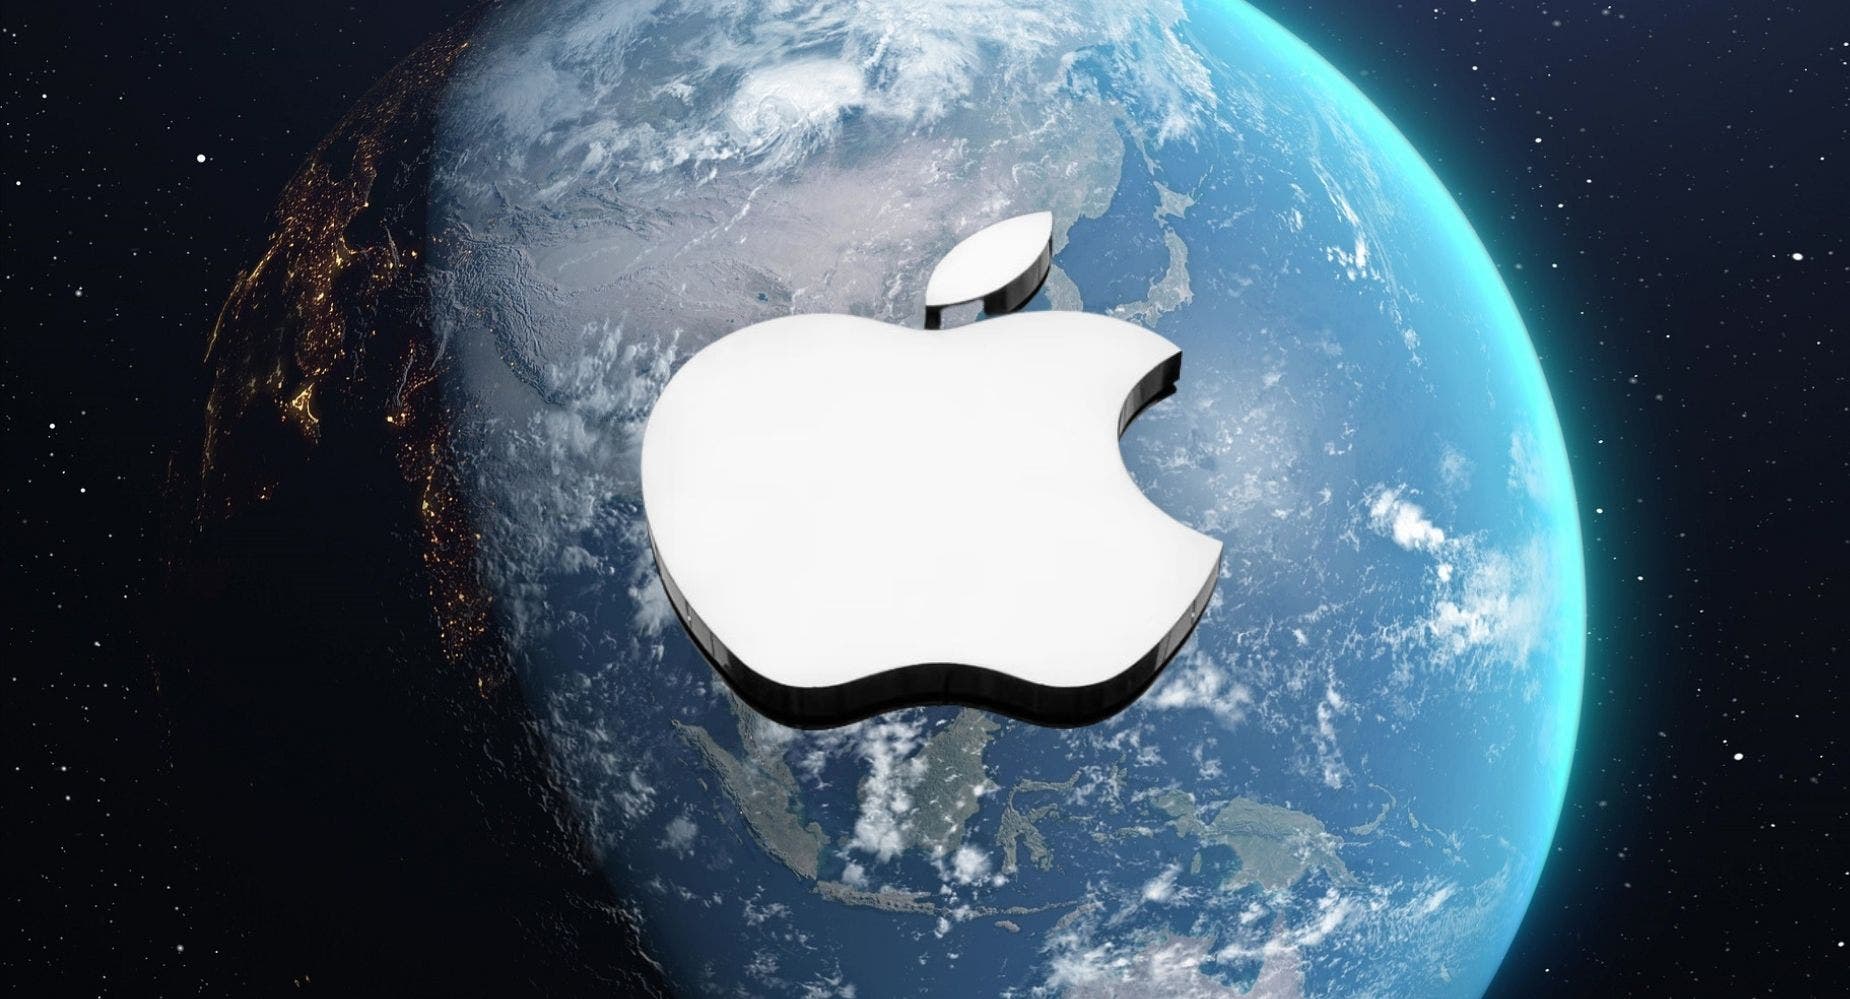 Why You Should Watch Market Leader Apple For The S&P 500's Future Direction